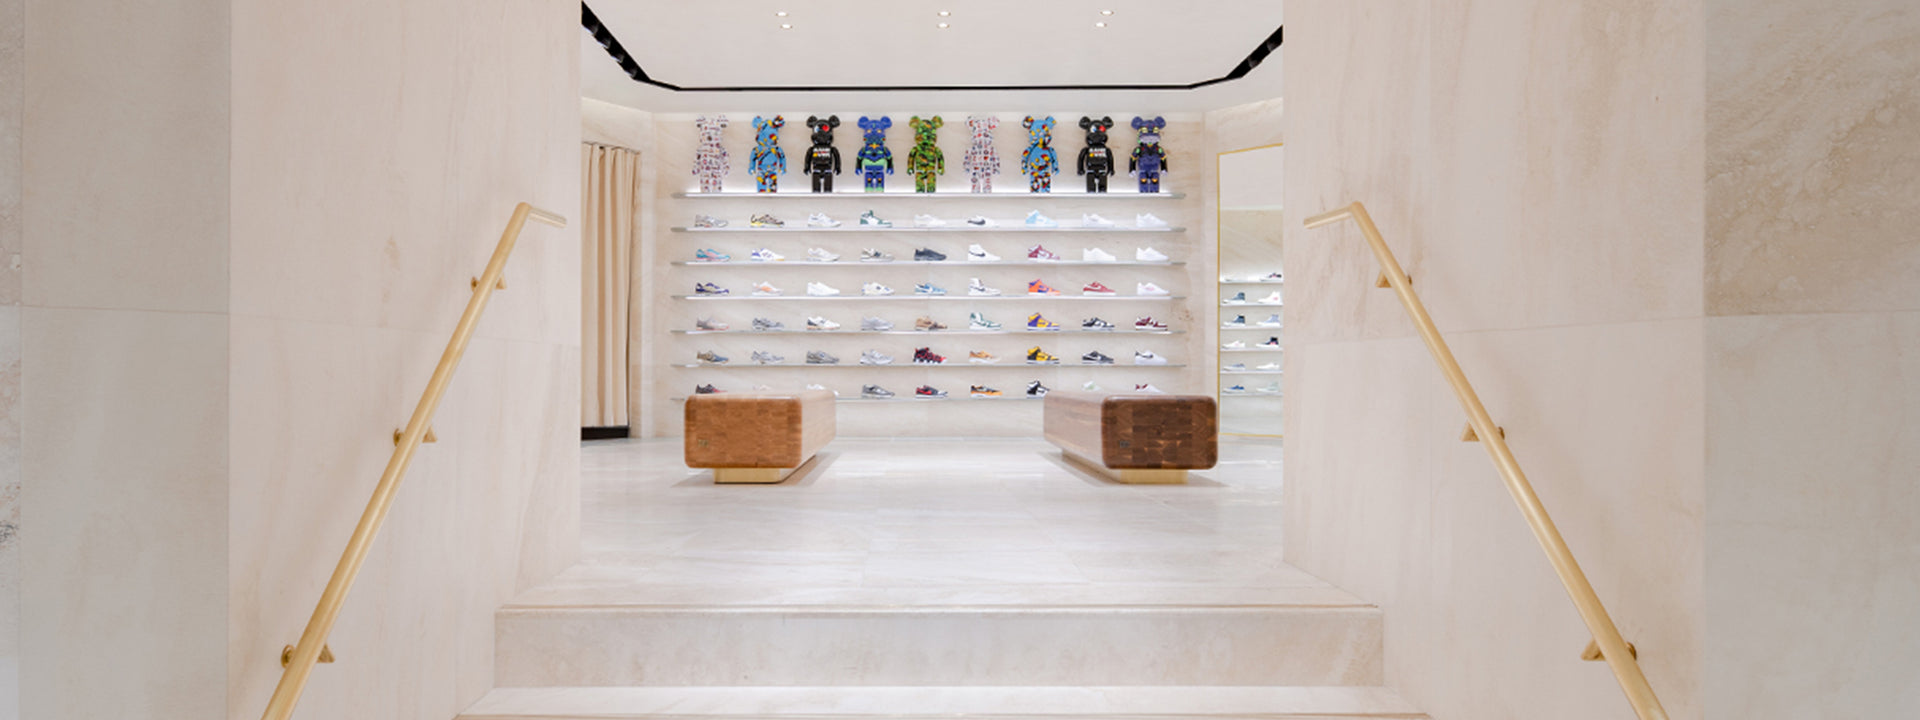 Location - Kith Beverly Hills